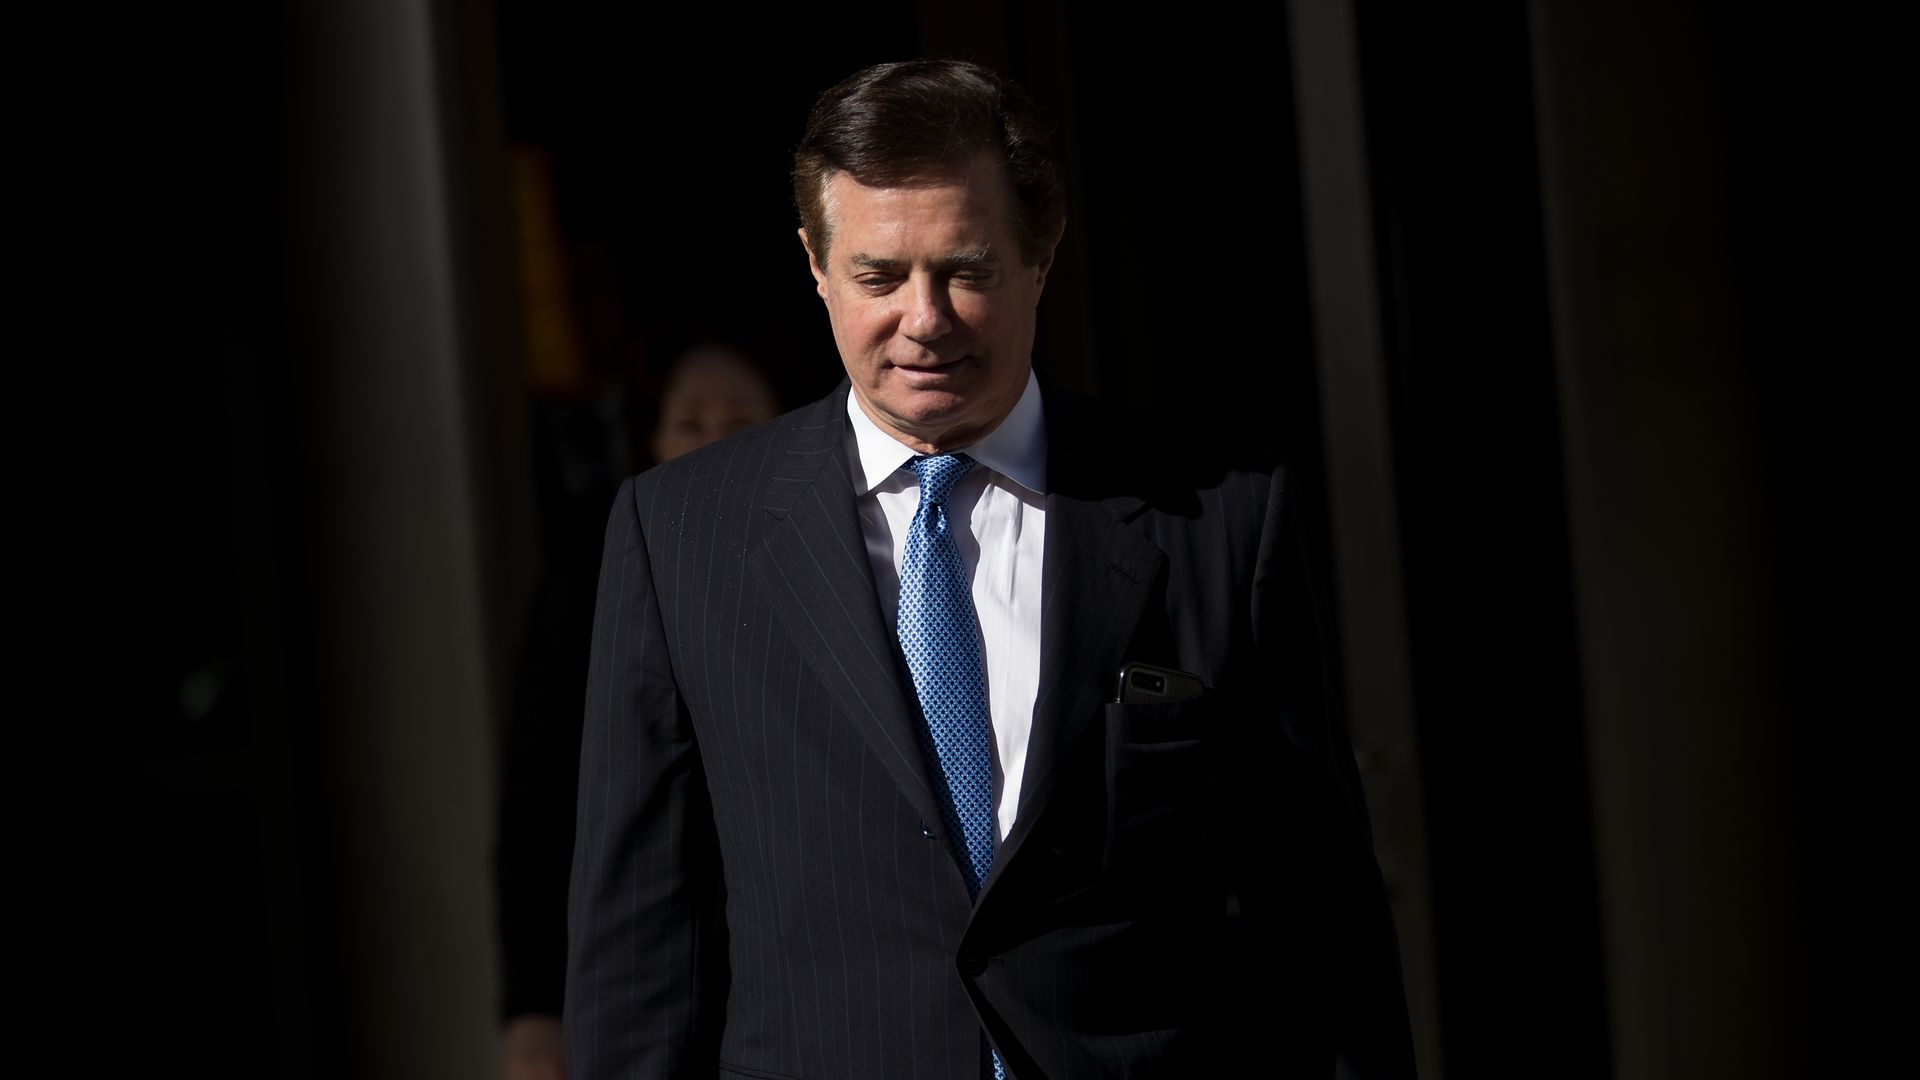 Paul Manafort, former campaign manager for Donald Trump, exits the E. Barrett Prettyman Federal Courthouse with his head down